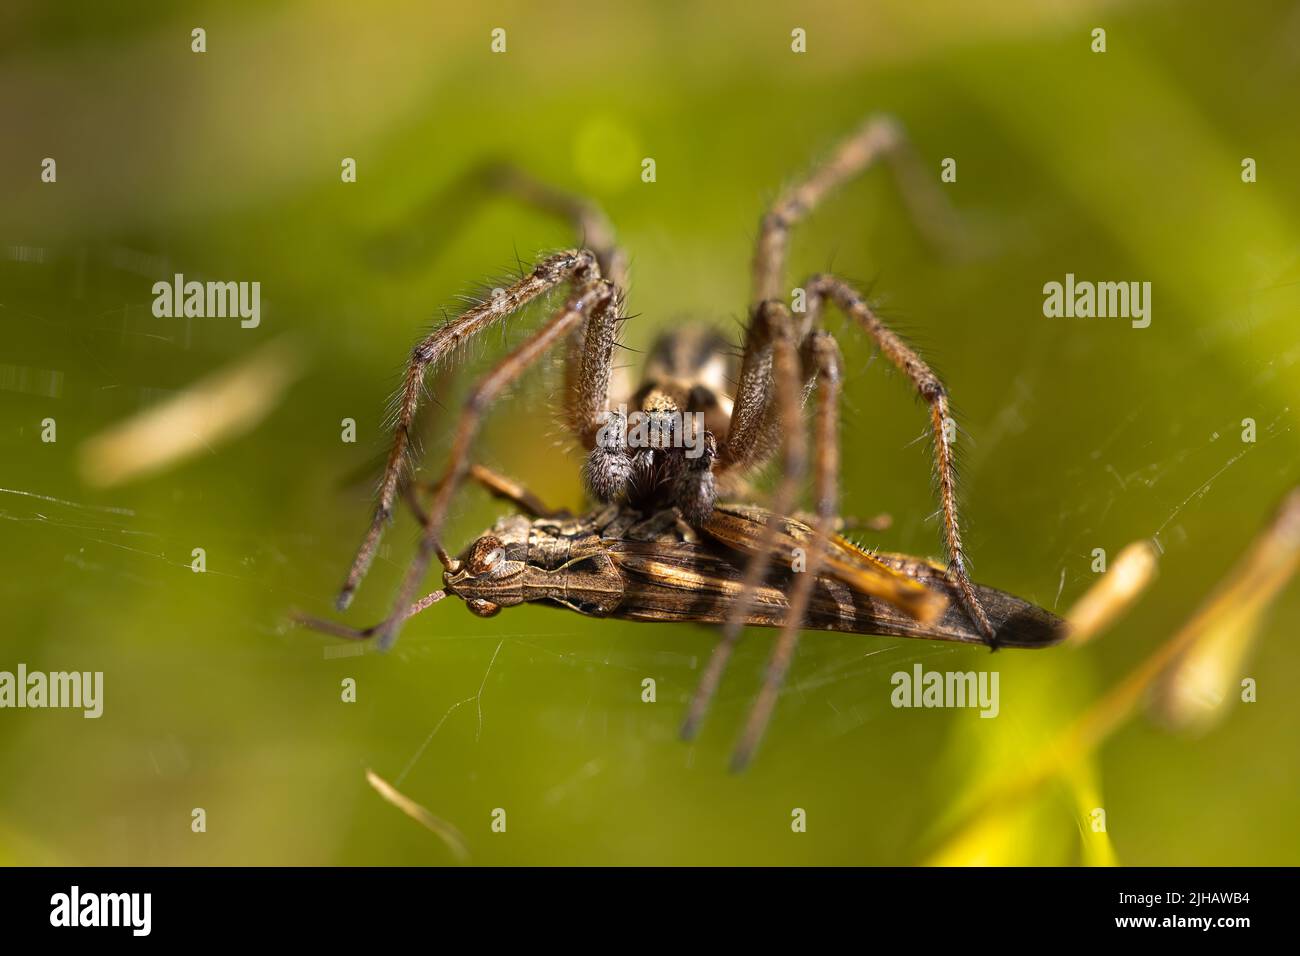 macro photograph of a spider hunting a grasshopper in its web. nature photography. green background. copy space Stock Photo